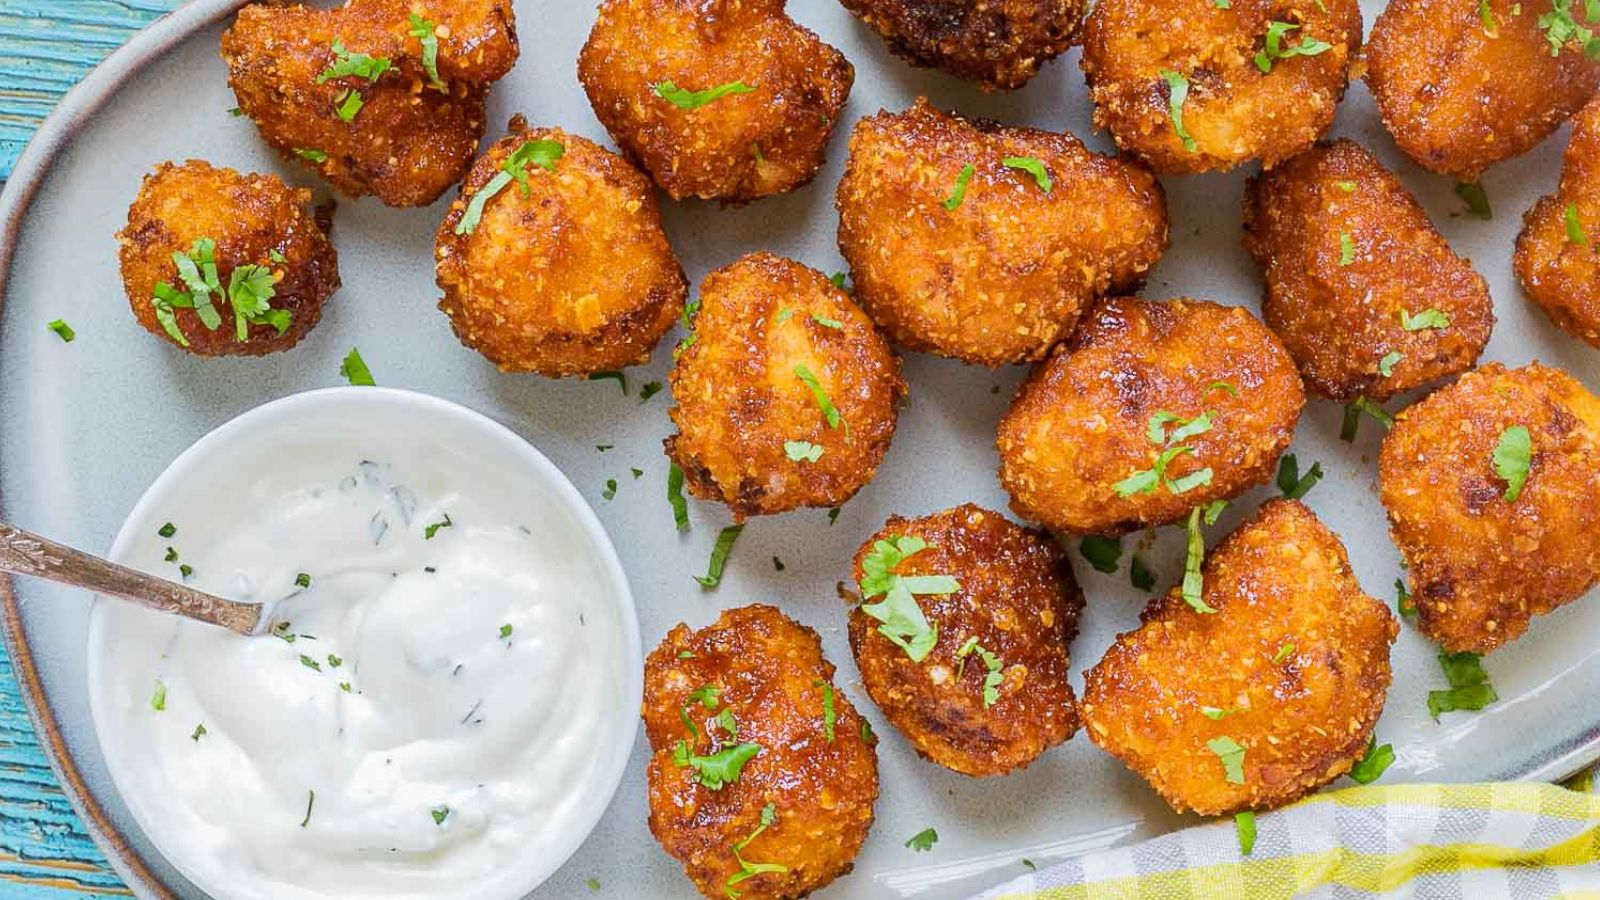 18 Cauliflower Recipes That Are Healthy and Delicious